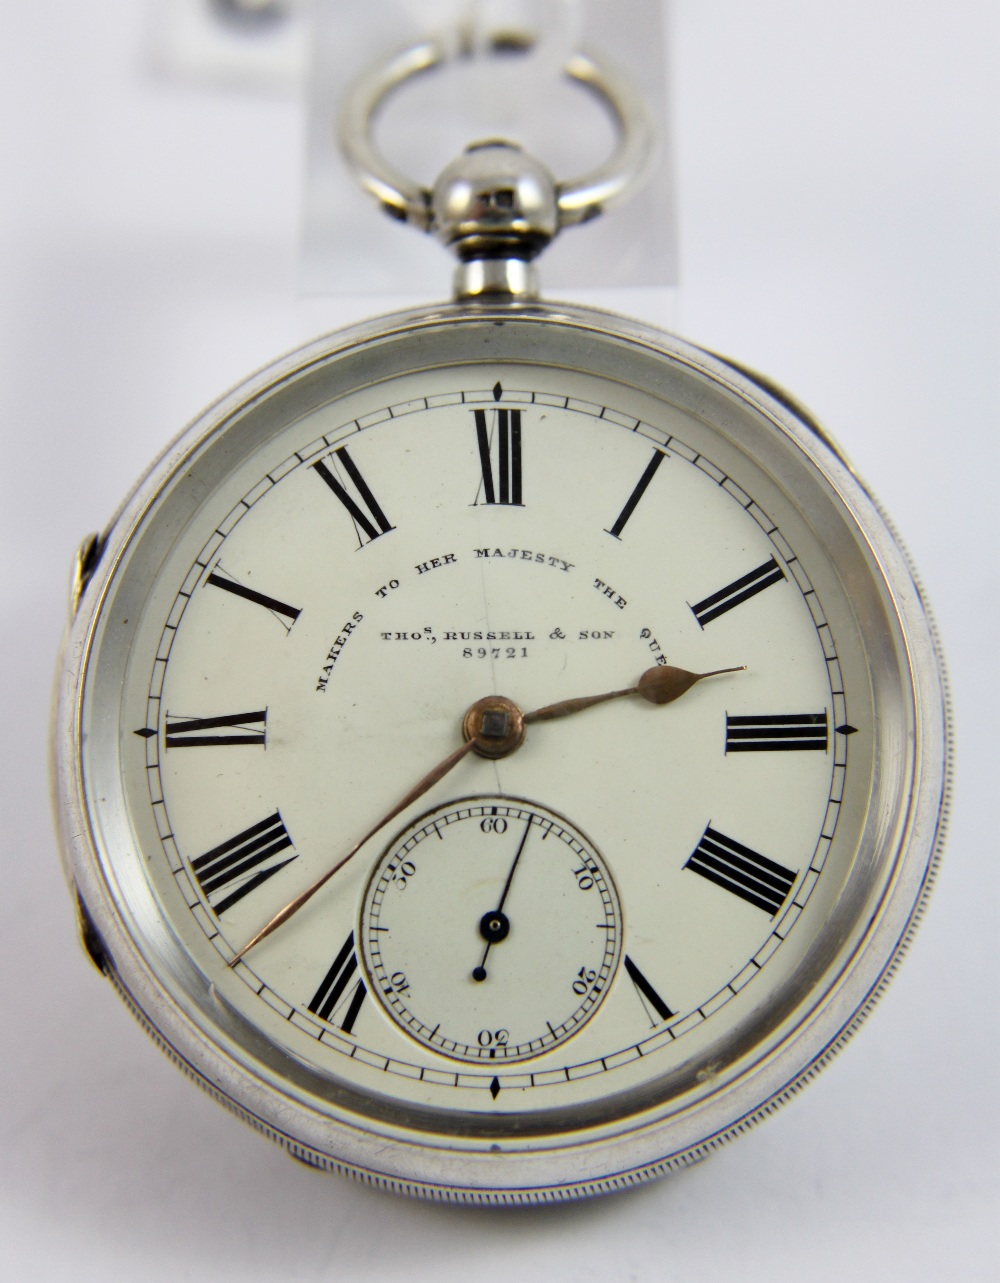 Thomas Russell & Son hallmarked sterling silver cased pocket watch